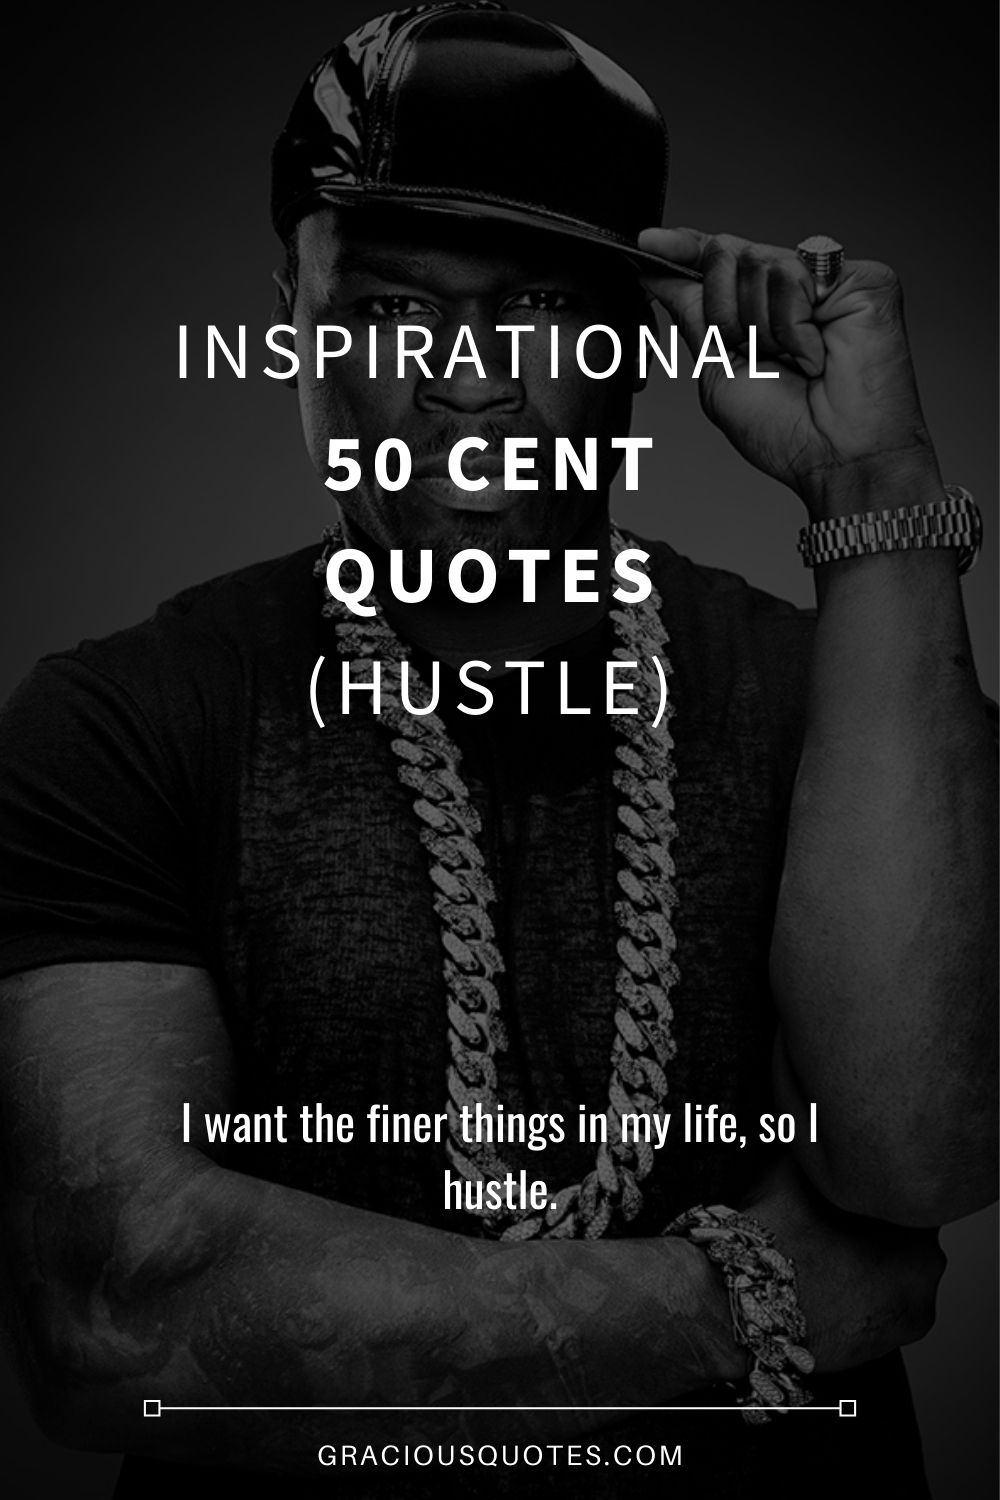 Inspirational 50 Cent Quotes (HUSTLE) - Gracious Quotes